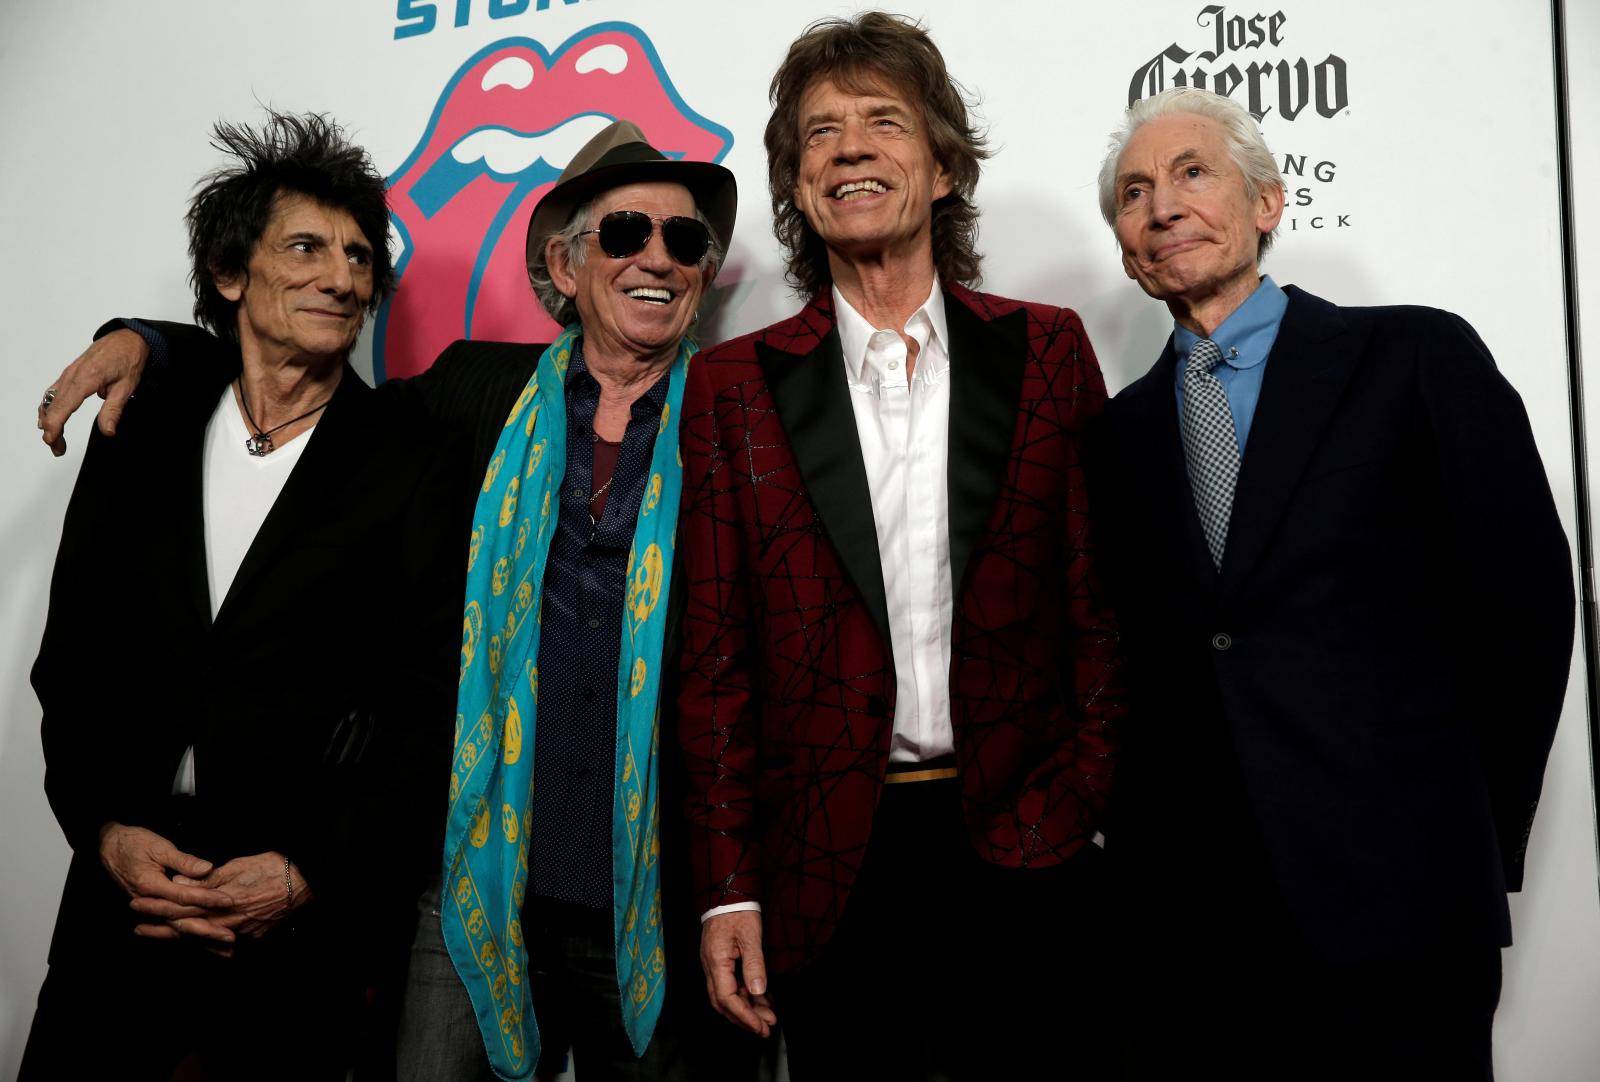 FILE PHOTO: The Rolling Stones pose as they arrive for the opening of the new exhibit "Exhibitionism: The Rolling Stones" in New York